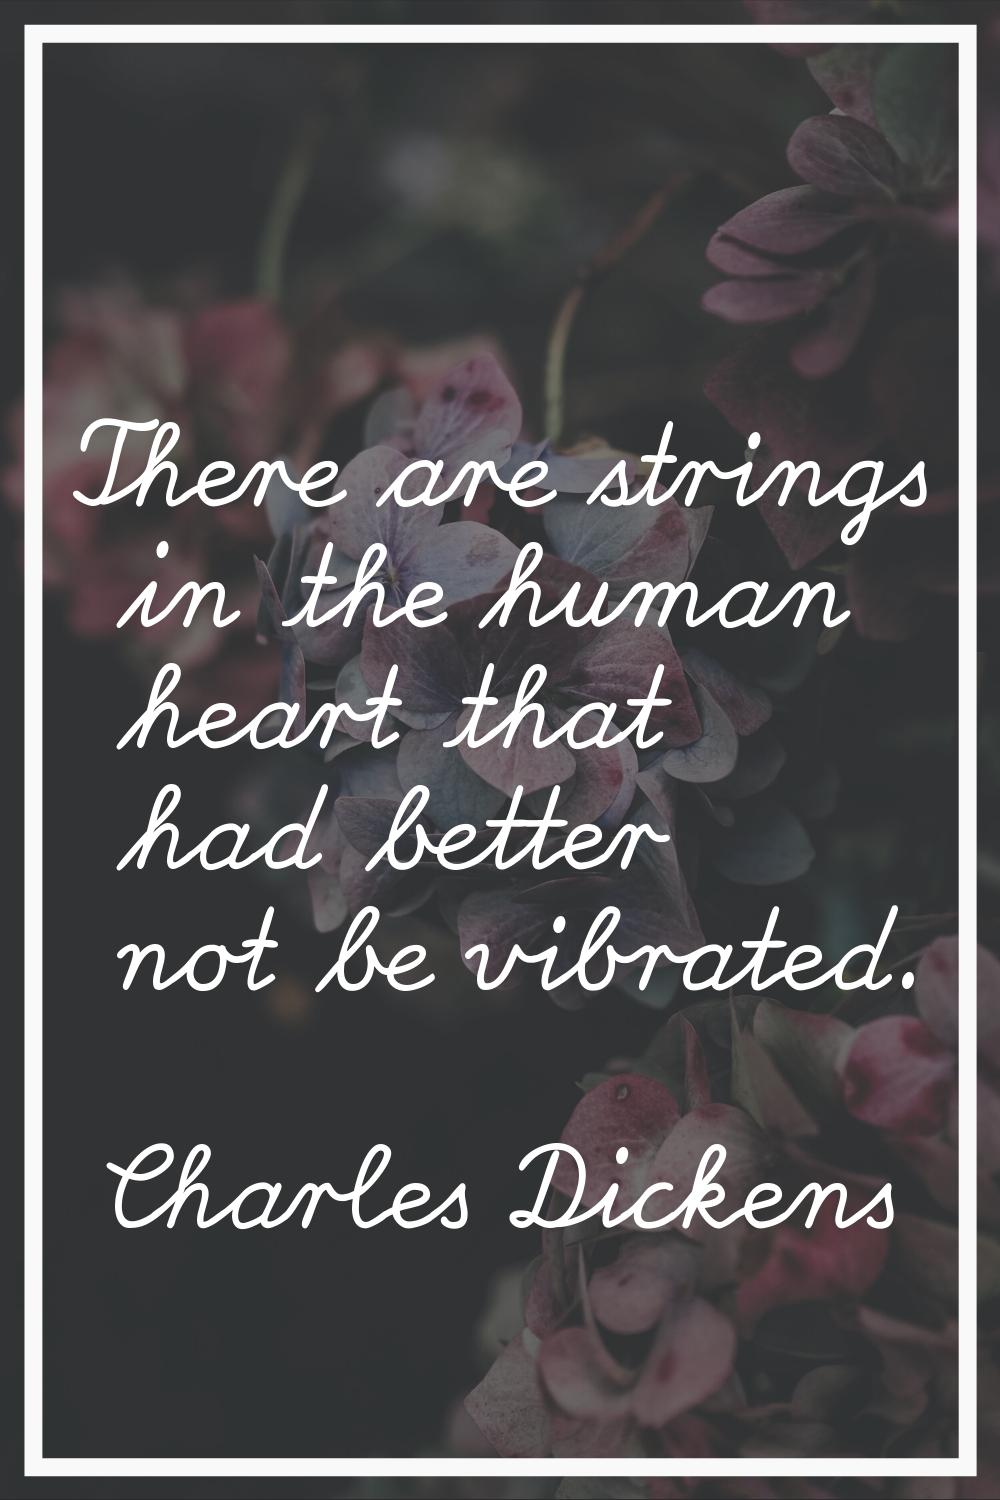 There are strings in the human heart that had better not be vibrated.